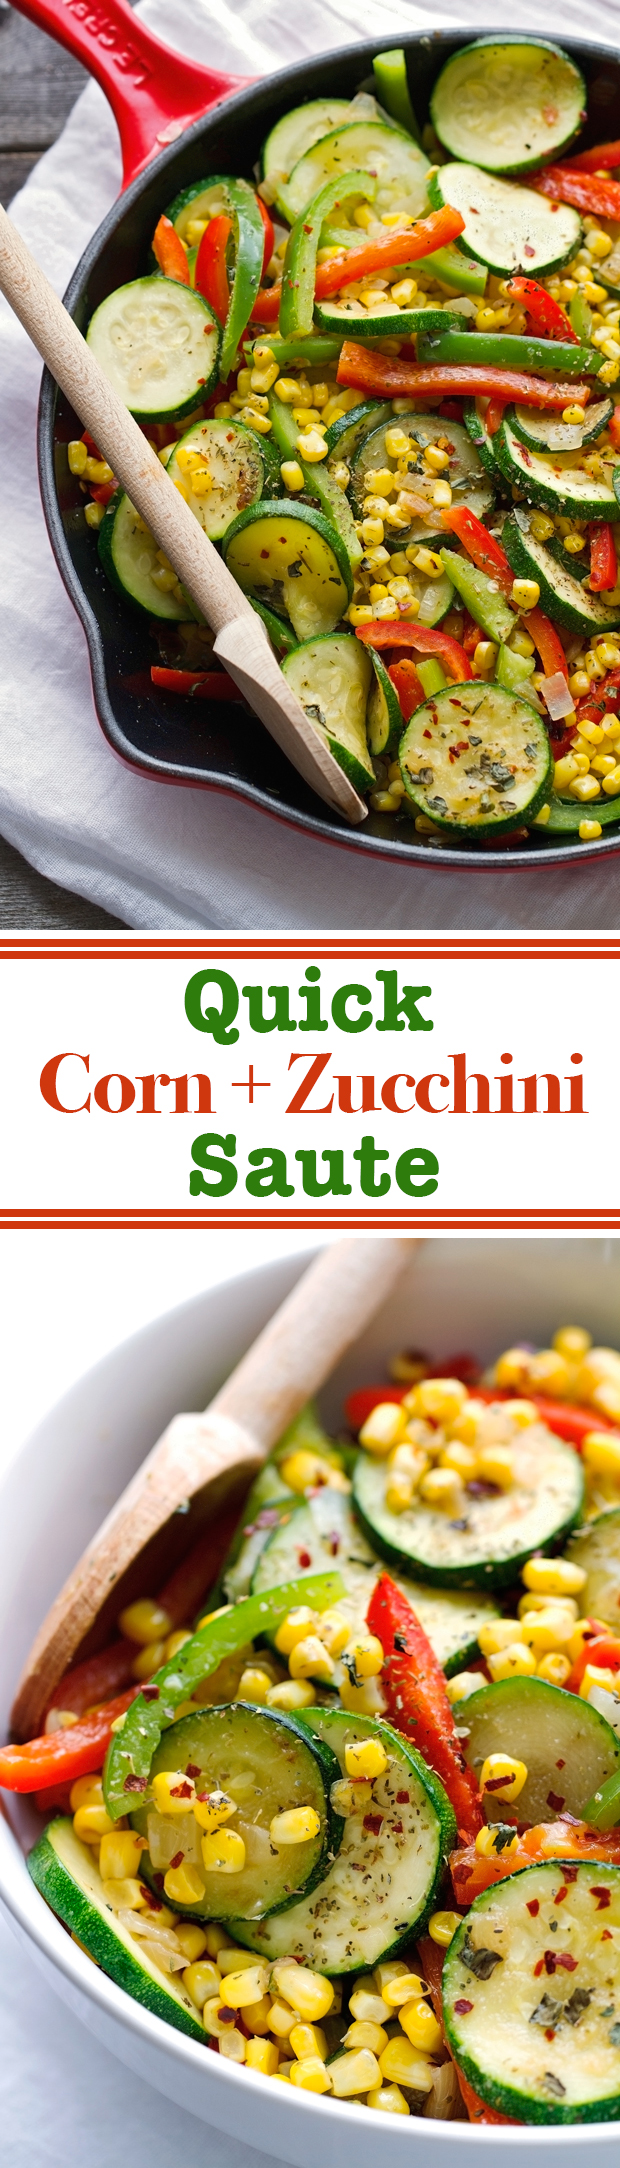 Quick Corn and Zucchini Saute that's ready in 10 minutes are is the perfect side dish for any meal! #zucchini #corn #sidedish #vegetarian | Littlespicejar.com